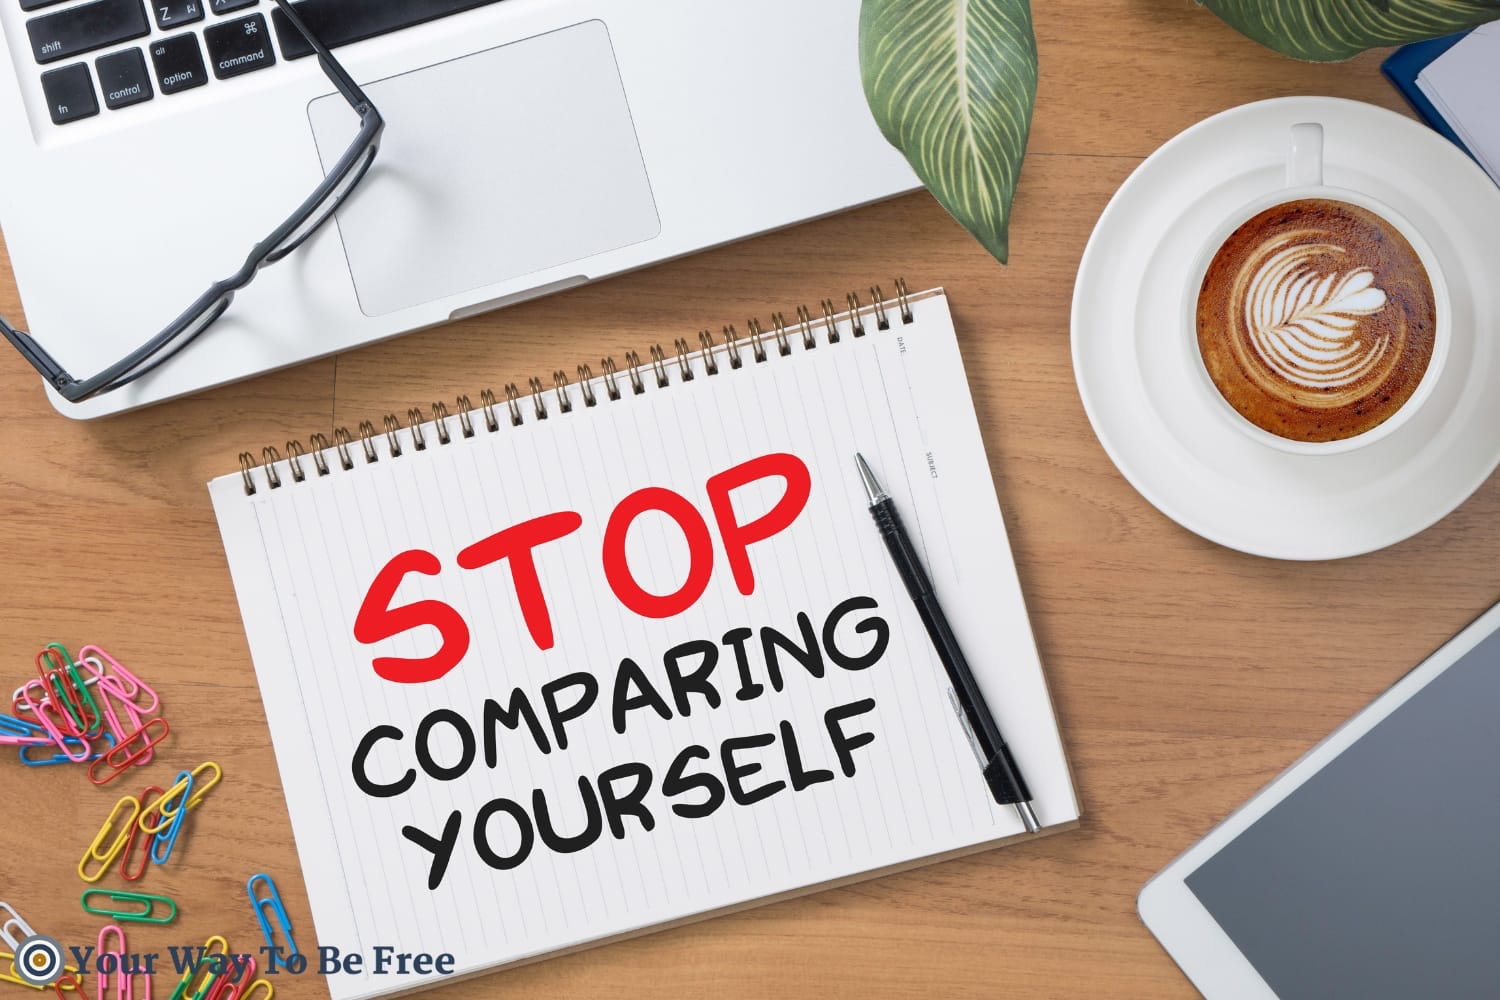 The image of a table with written Stop comparing yourself. Breaking Free from Comparison